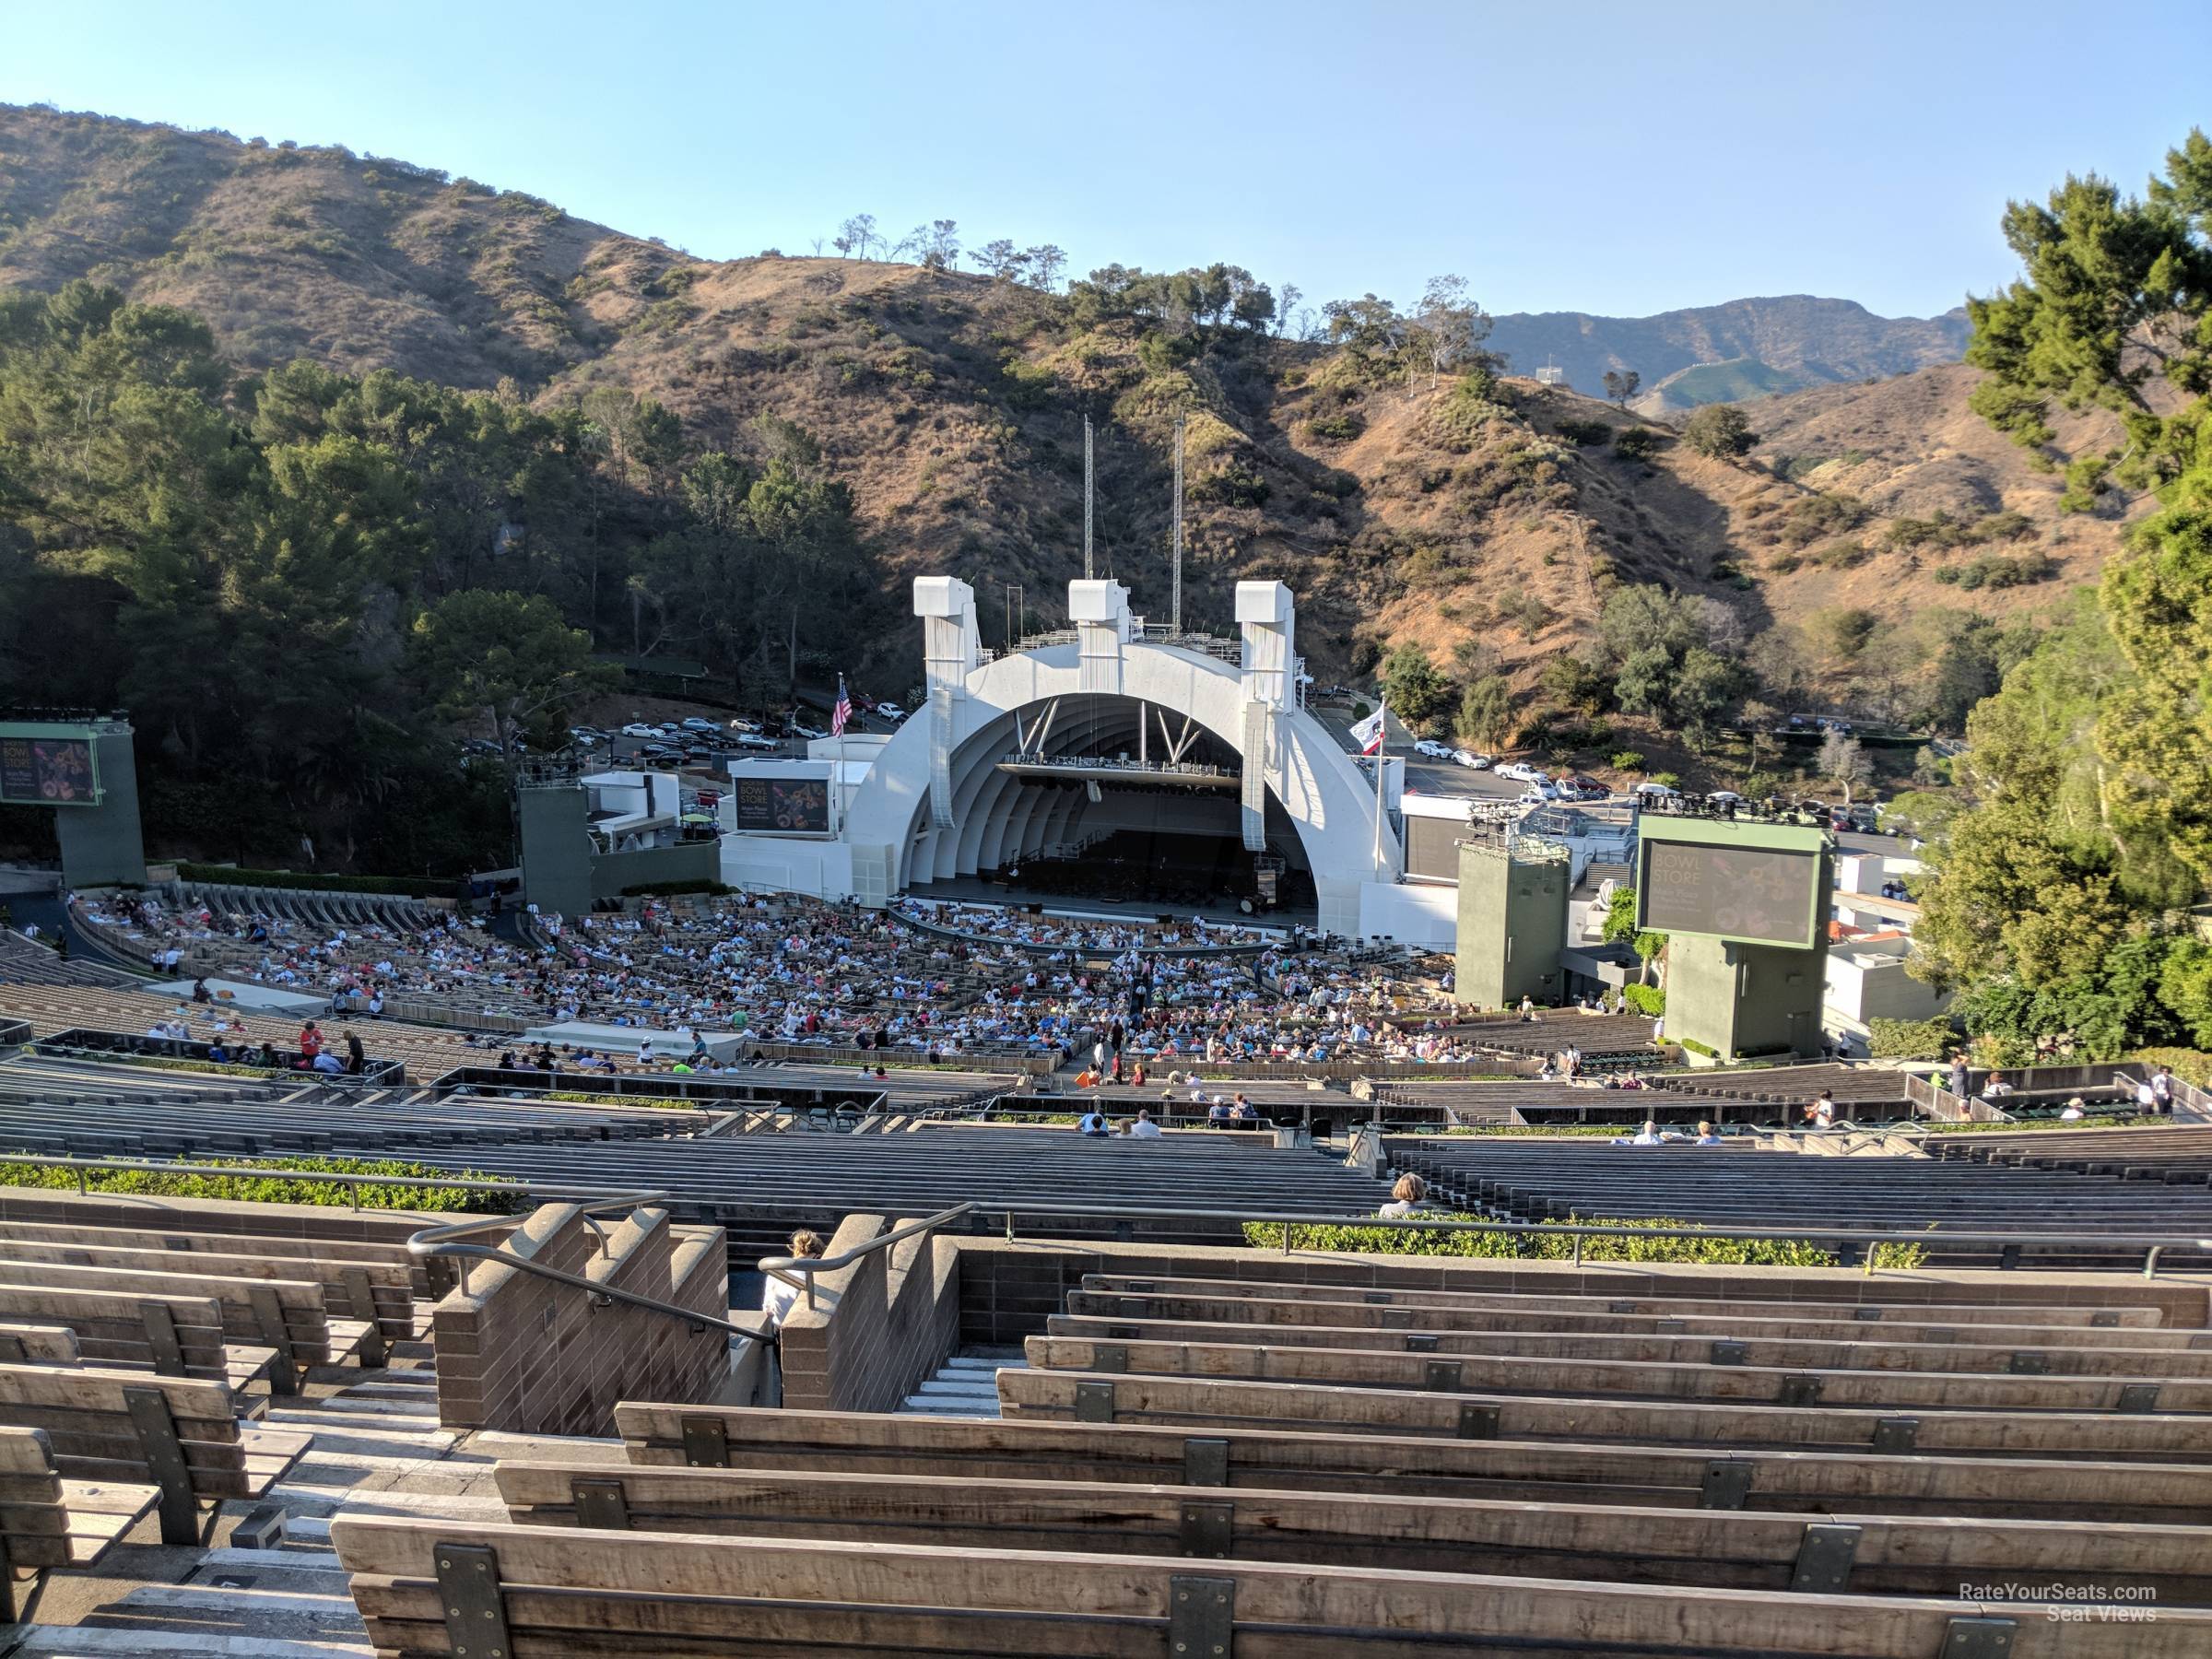 section q2, row 13 seat view  - hollywood bowl